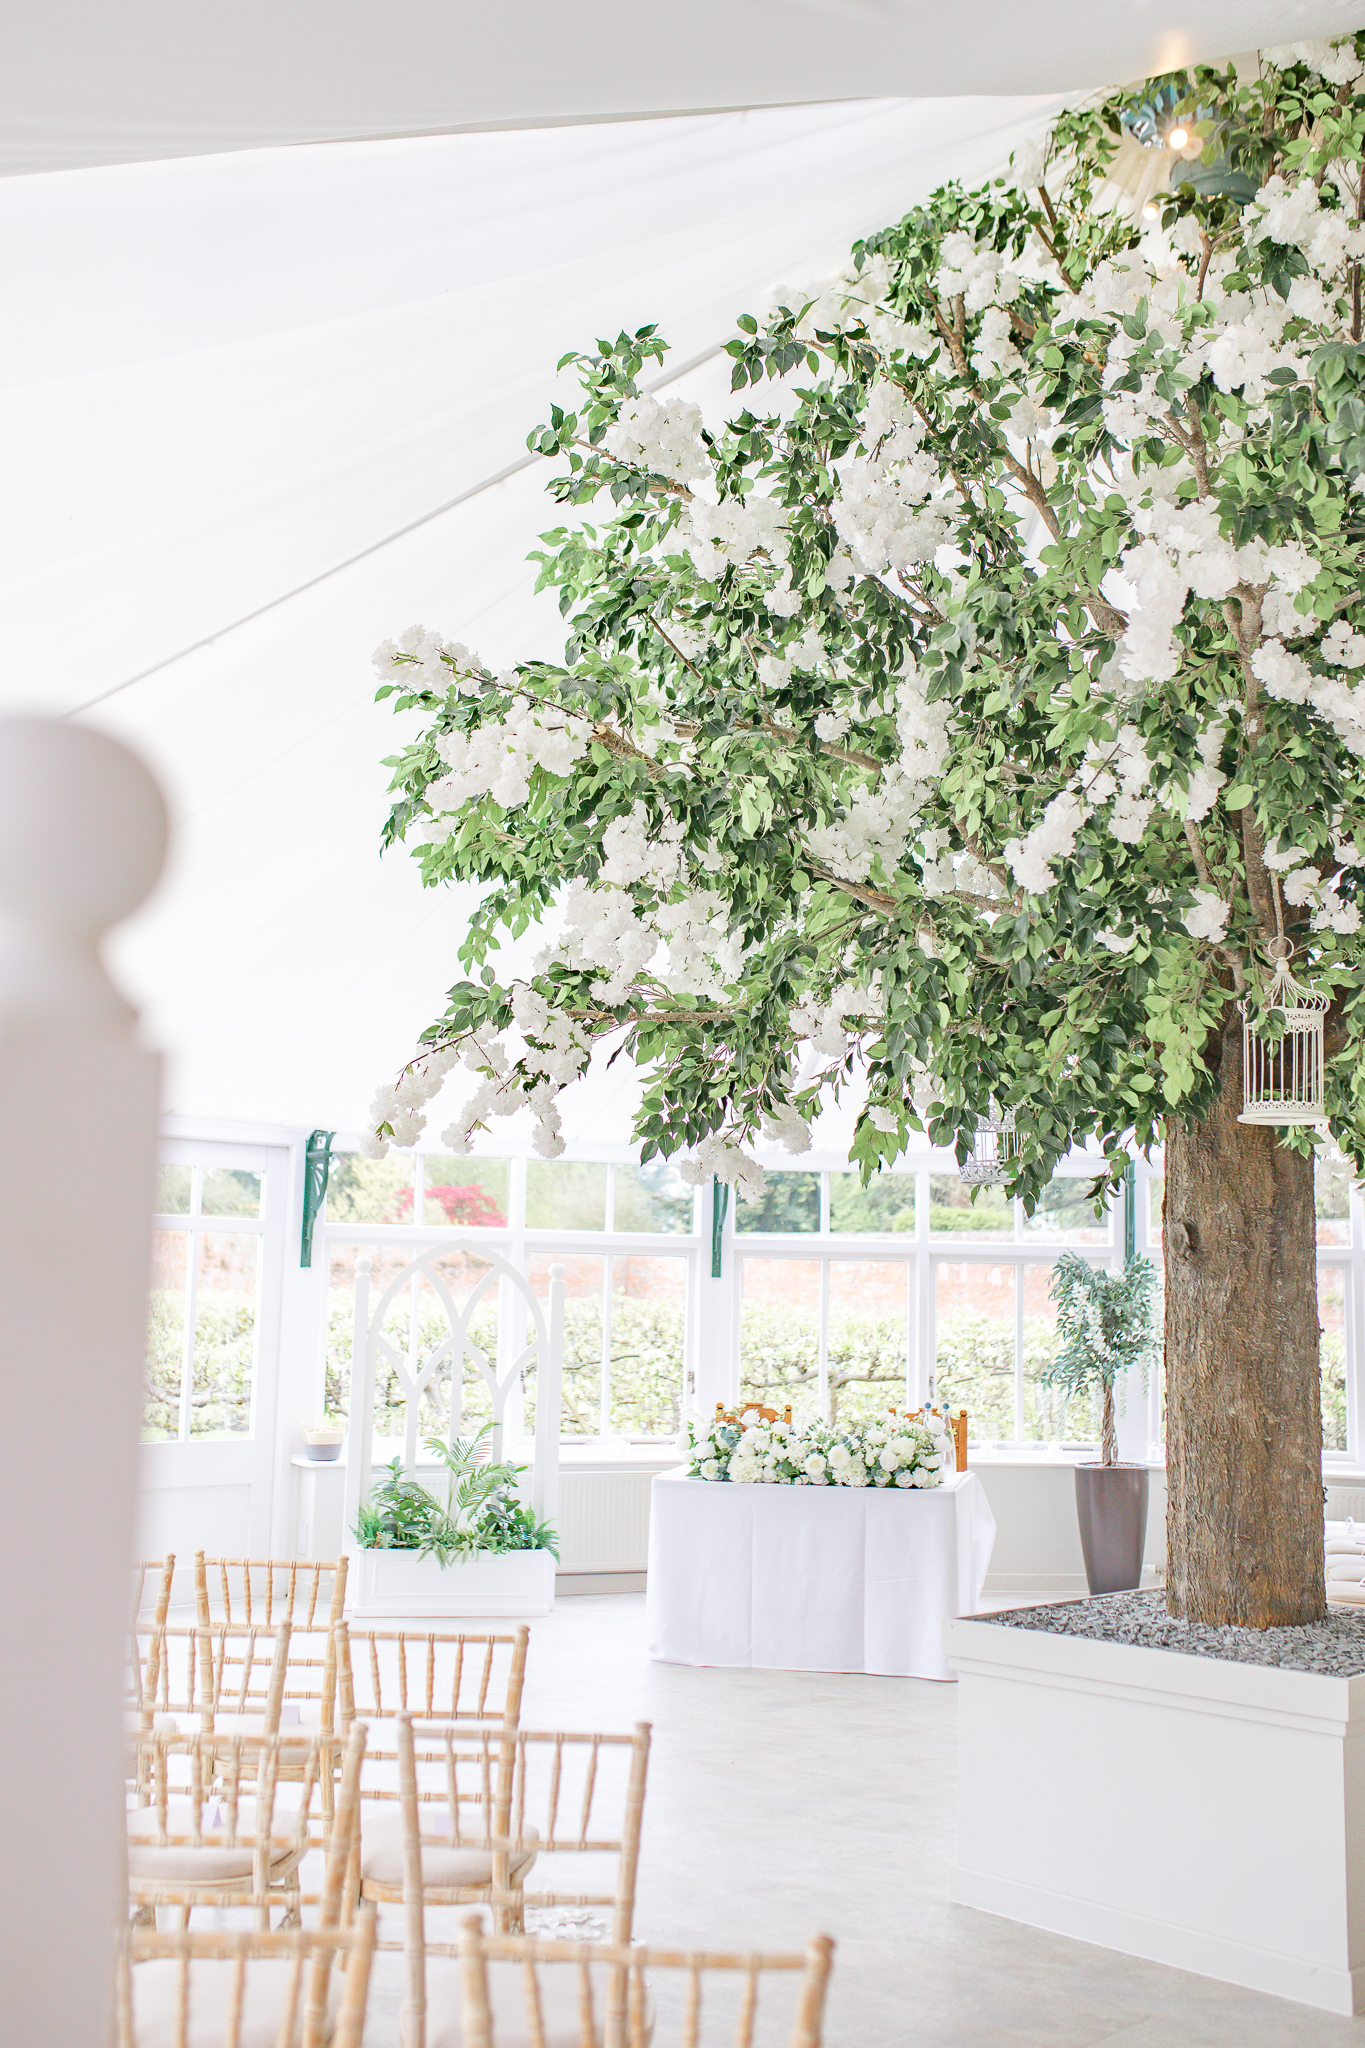 Inside the glass house ceremony room at Combermere Abbey in Cheshire